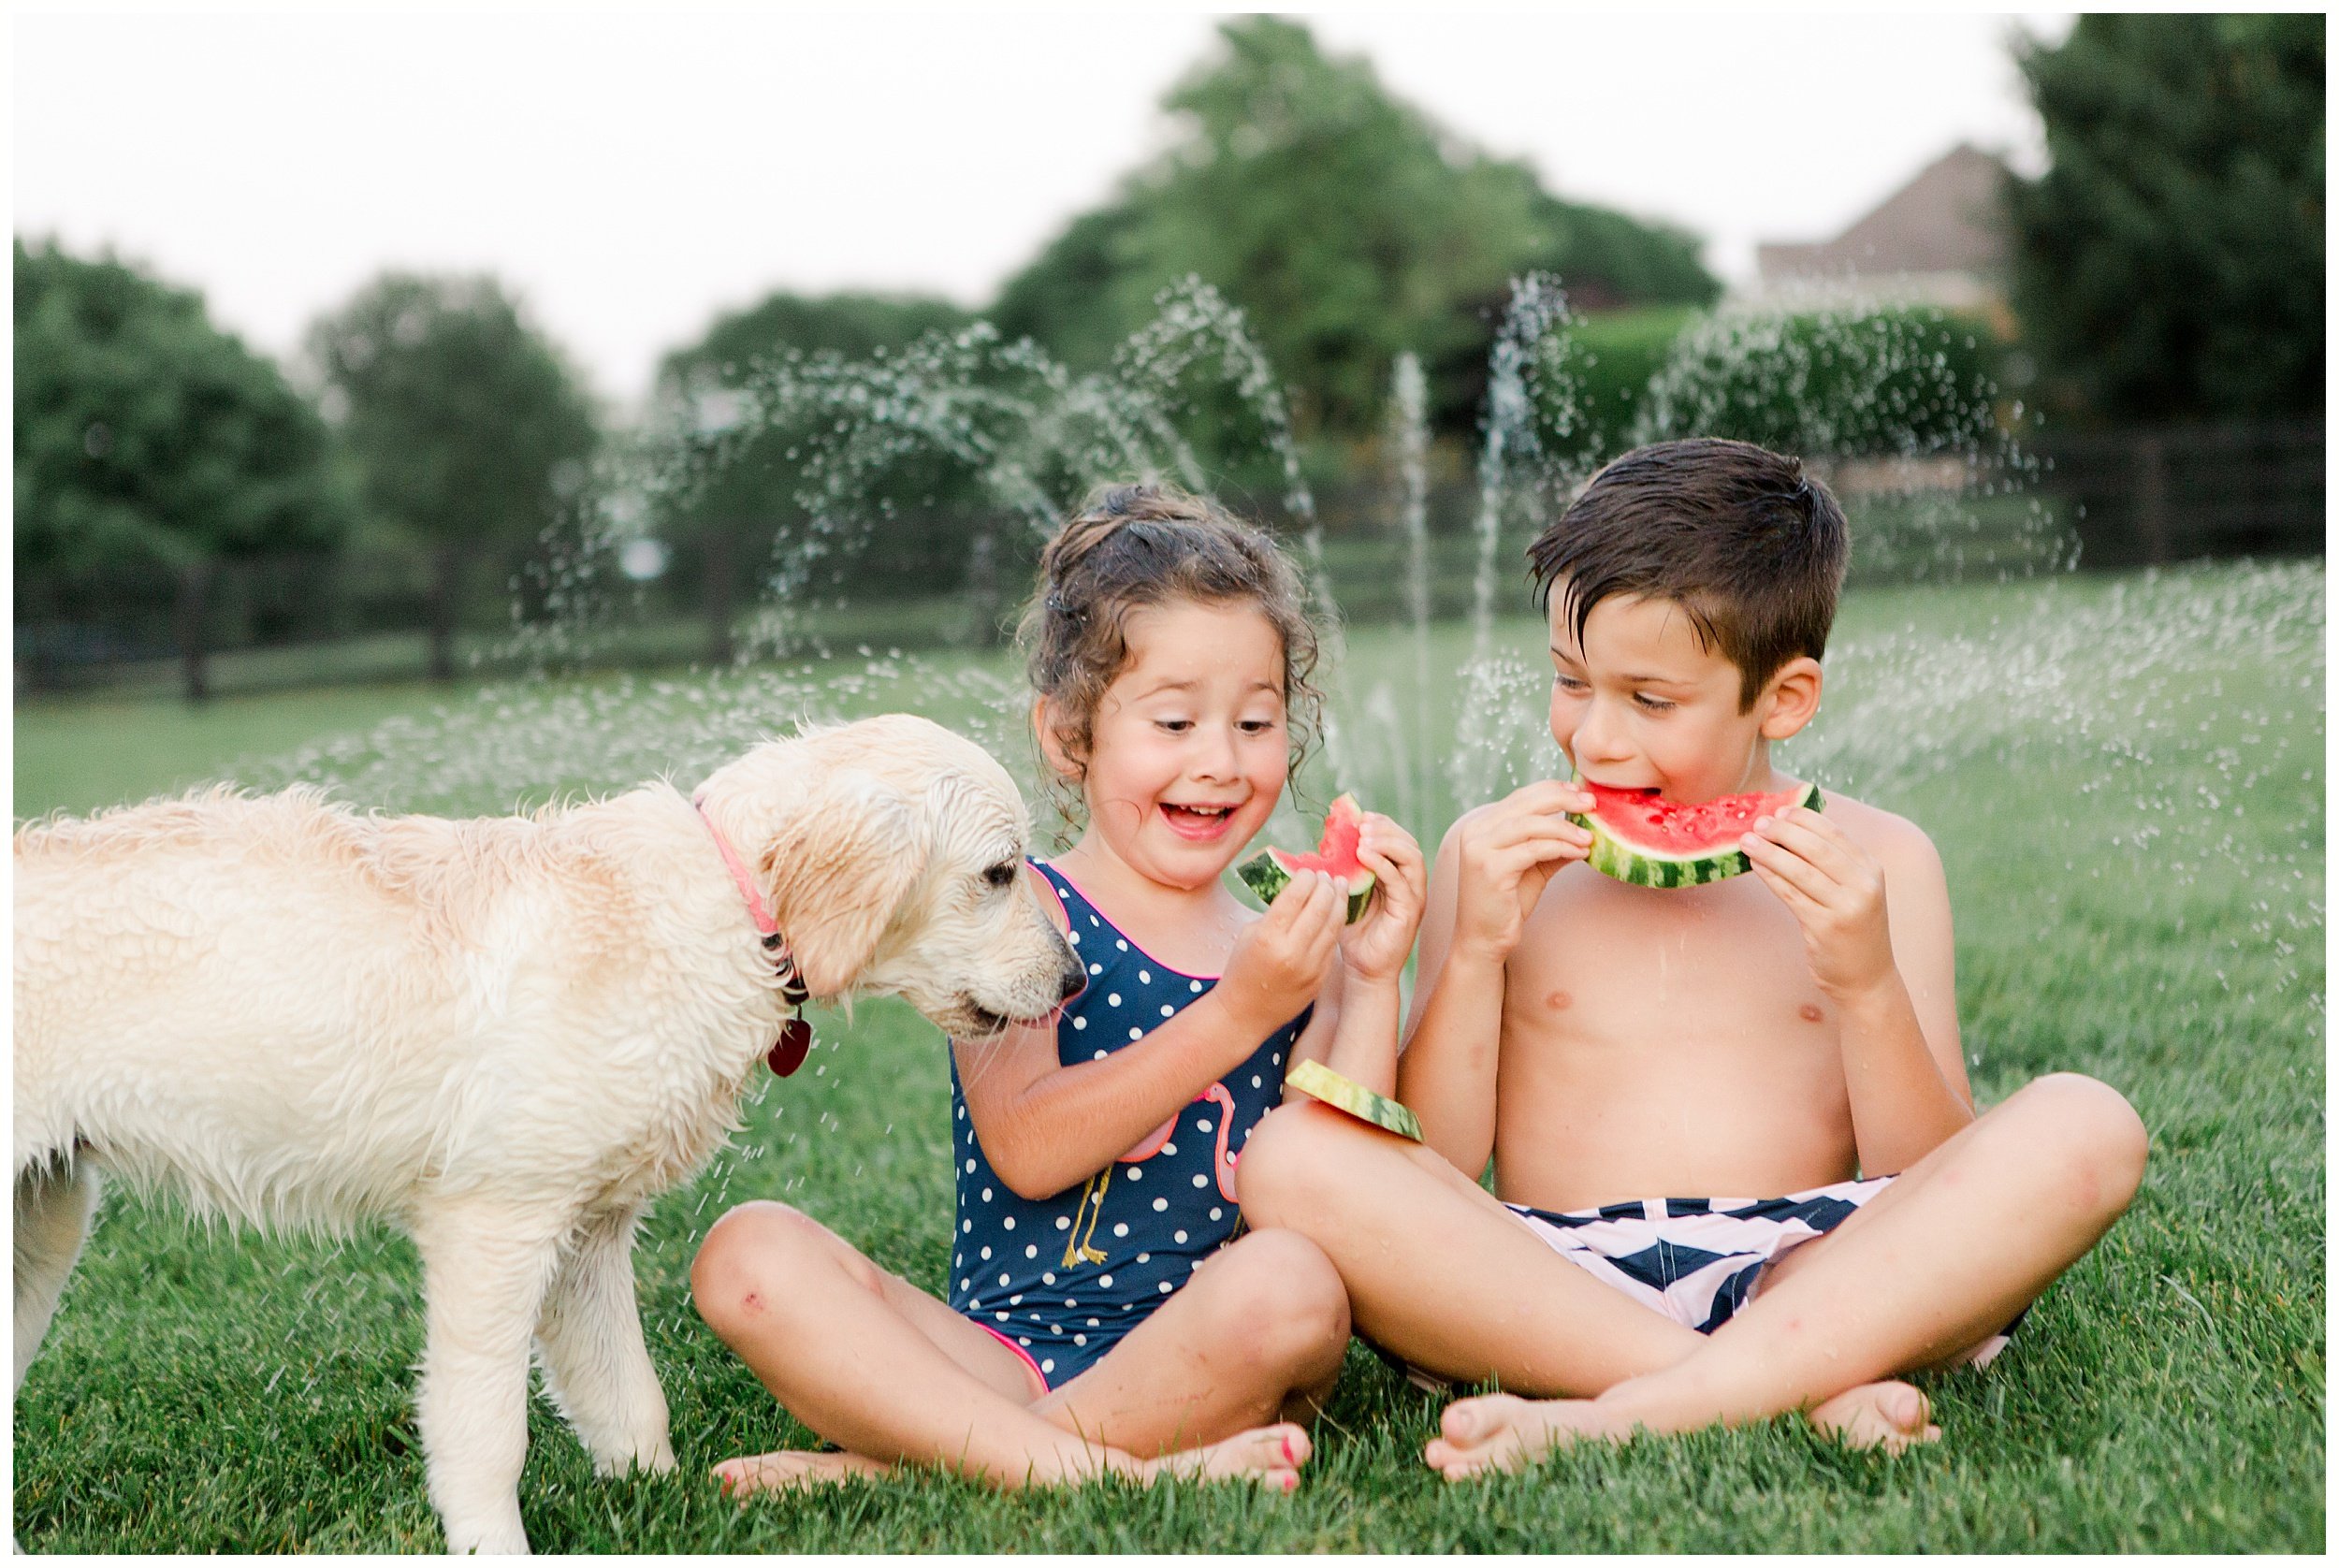  Puppy sneaking a bite of watermelon from little girl and boy in front of sprinklers. Summer fun in Kentucky captured by Priscilla Baierlein Photography. 